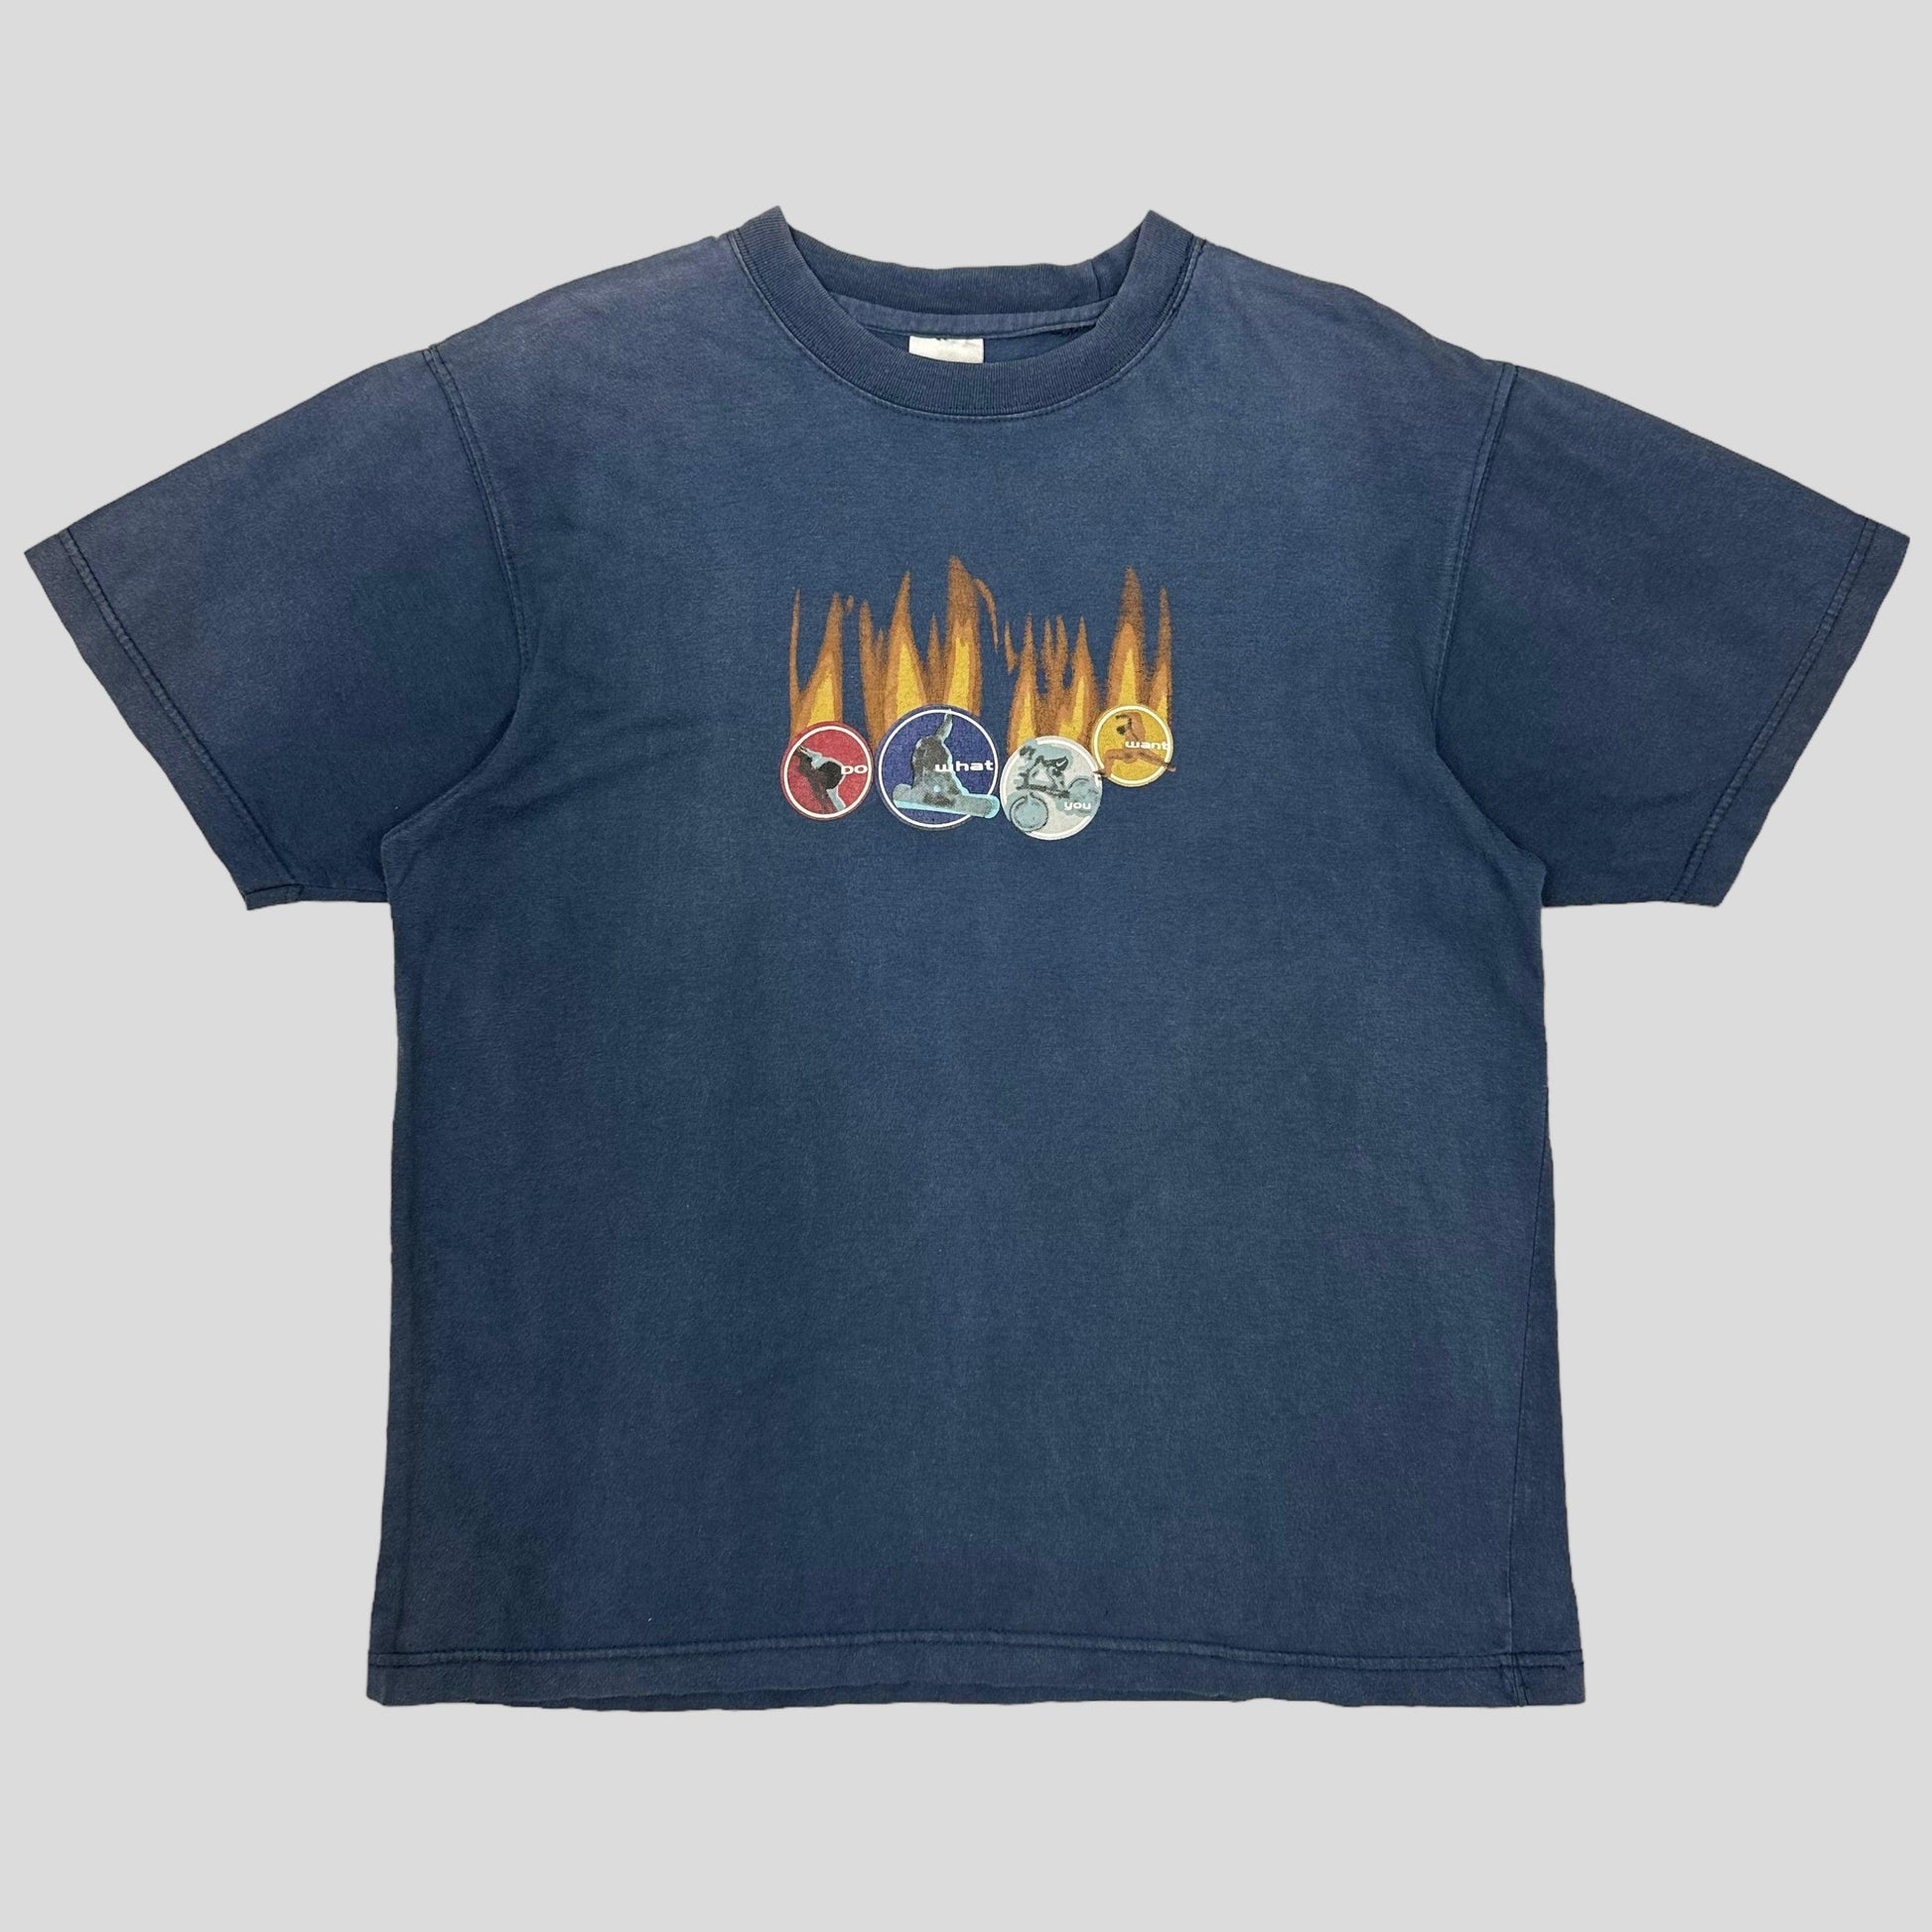 Nike 90’s Flame T-shirt - M - Known Source